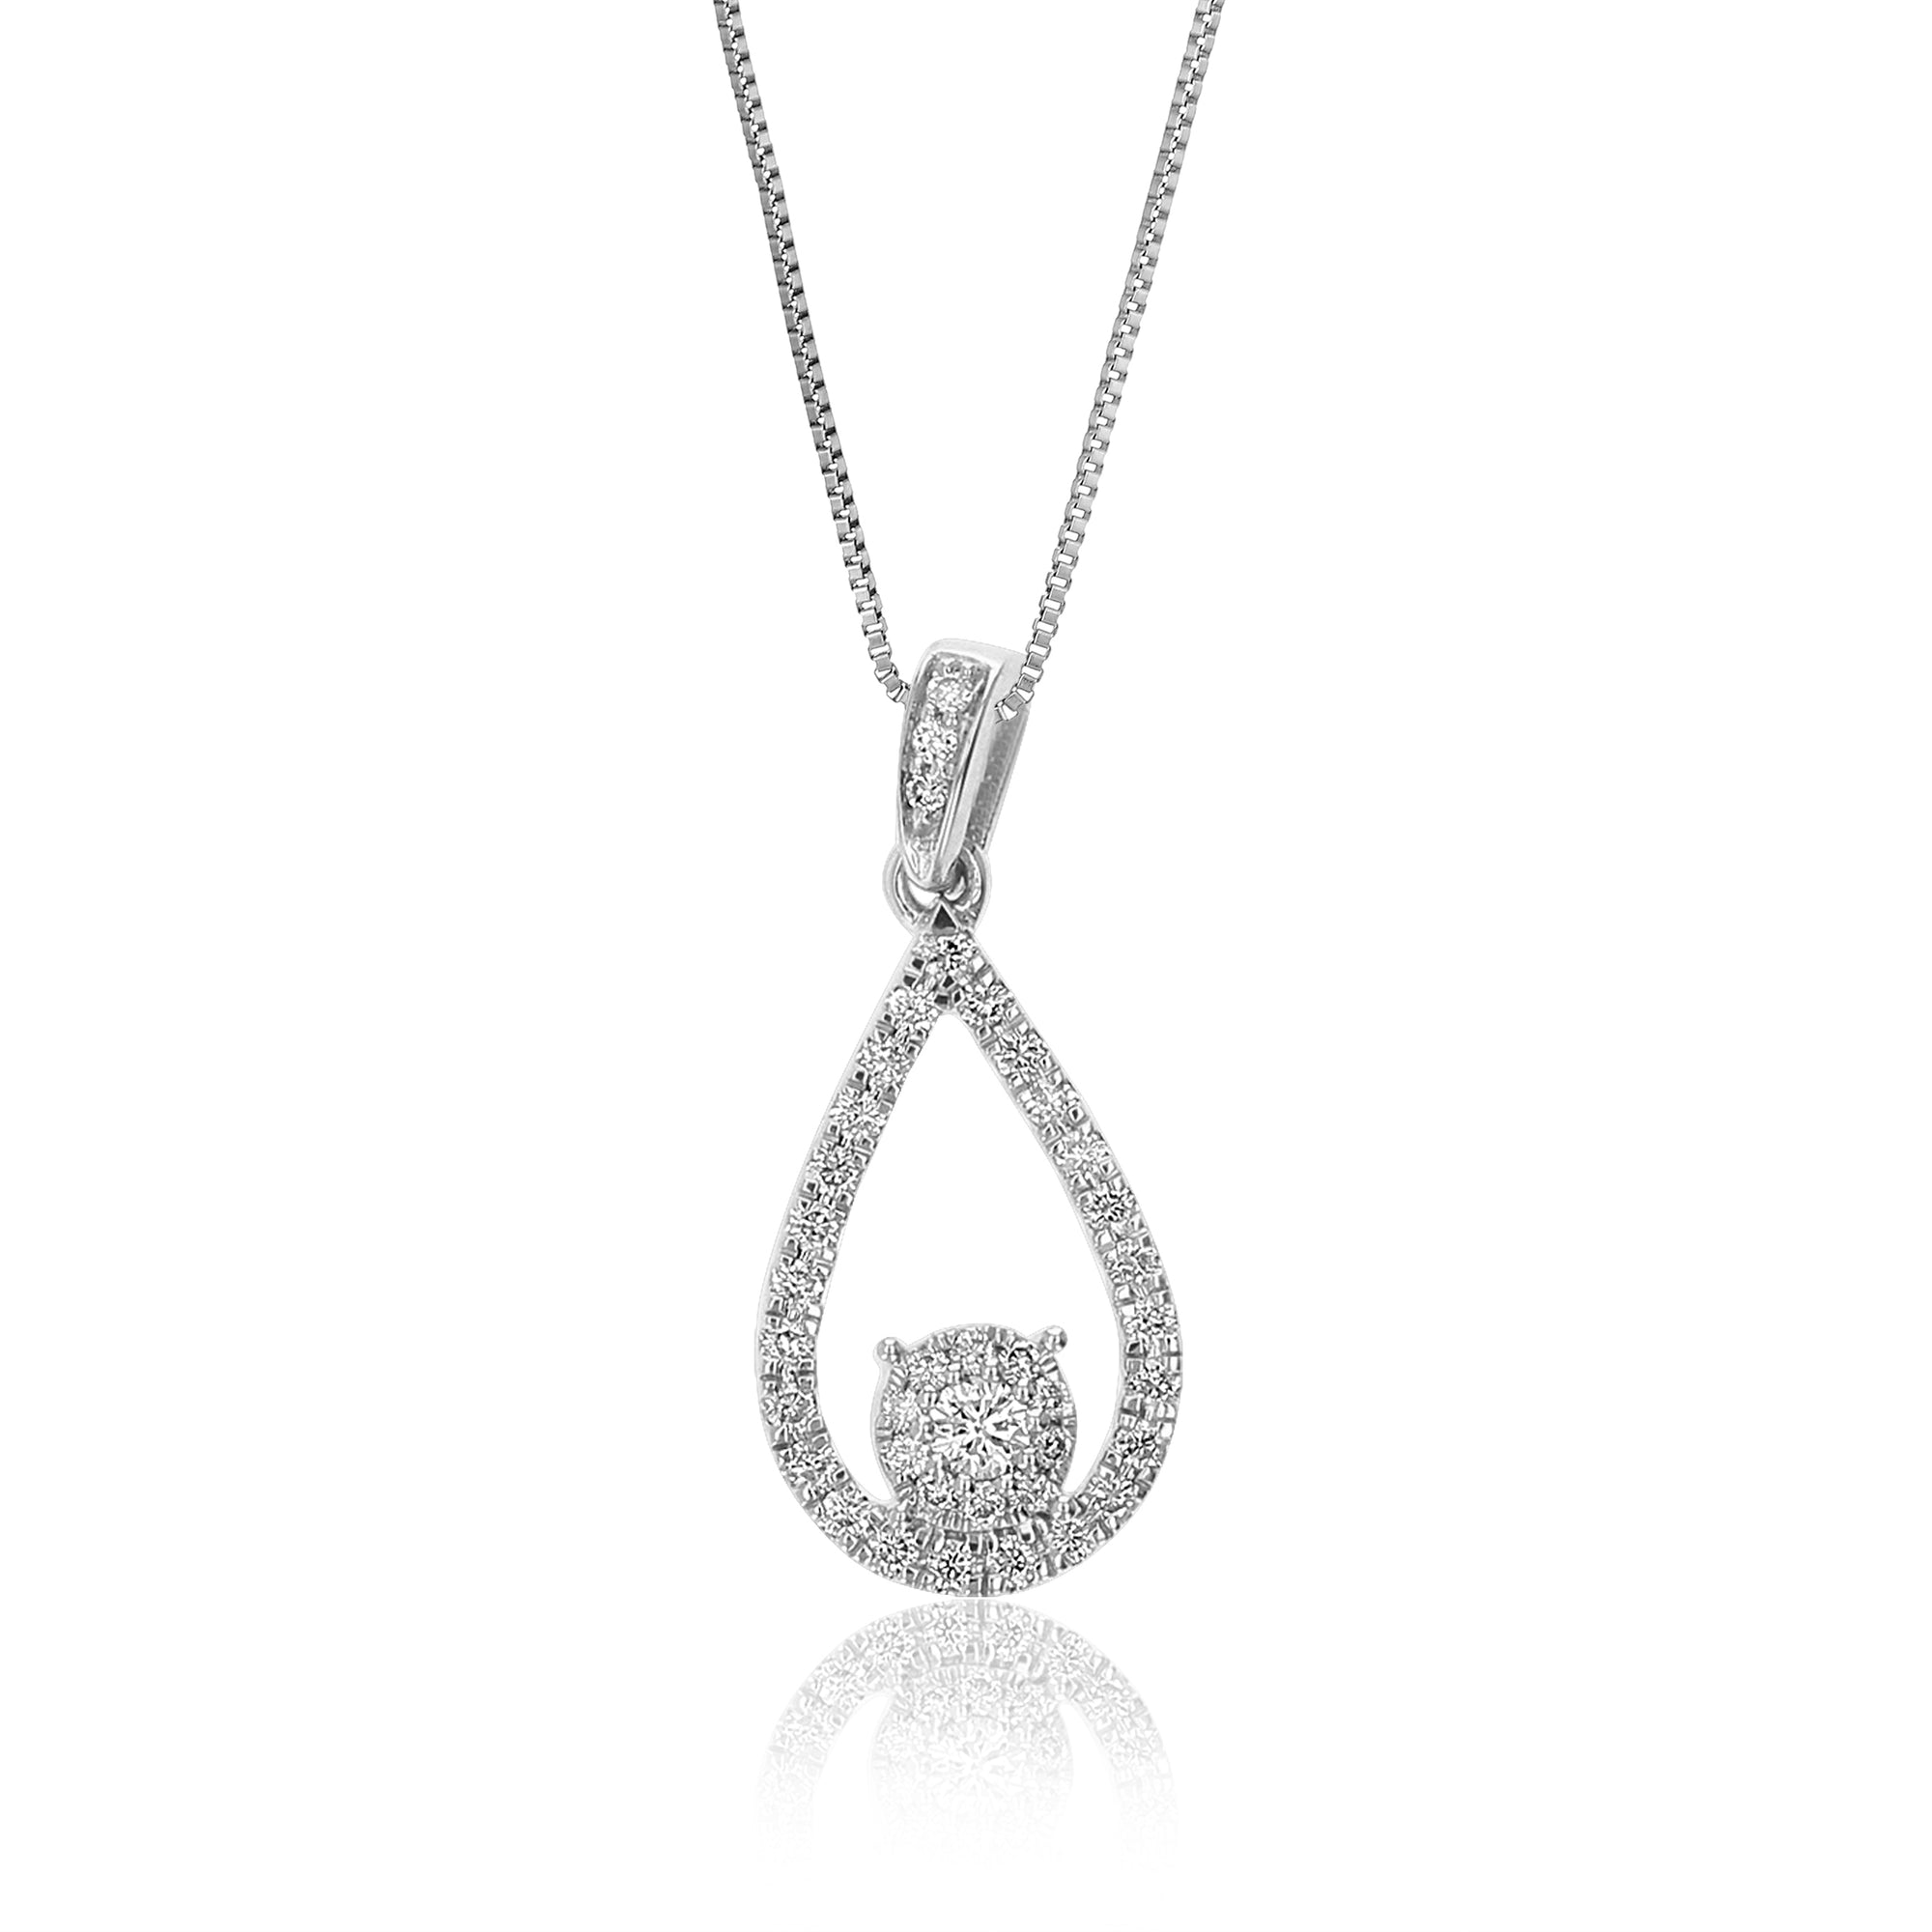 1/3 cttw Diamond Pendant Necklace for Women, Lab Grown Diamond Drop Pendant Necklace in .925 Sterling Silver with Chain, Size 3/4 Inch